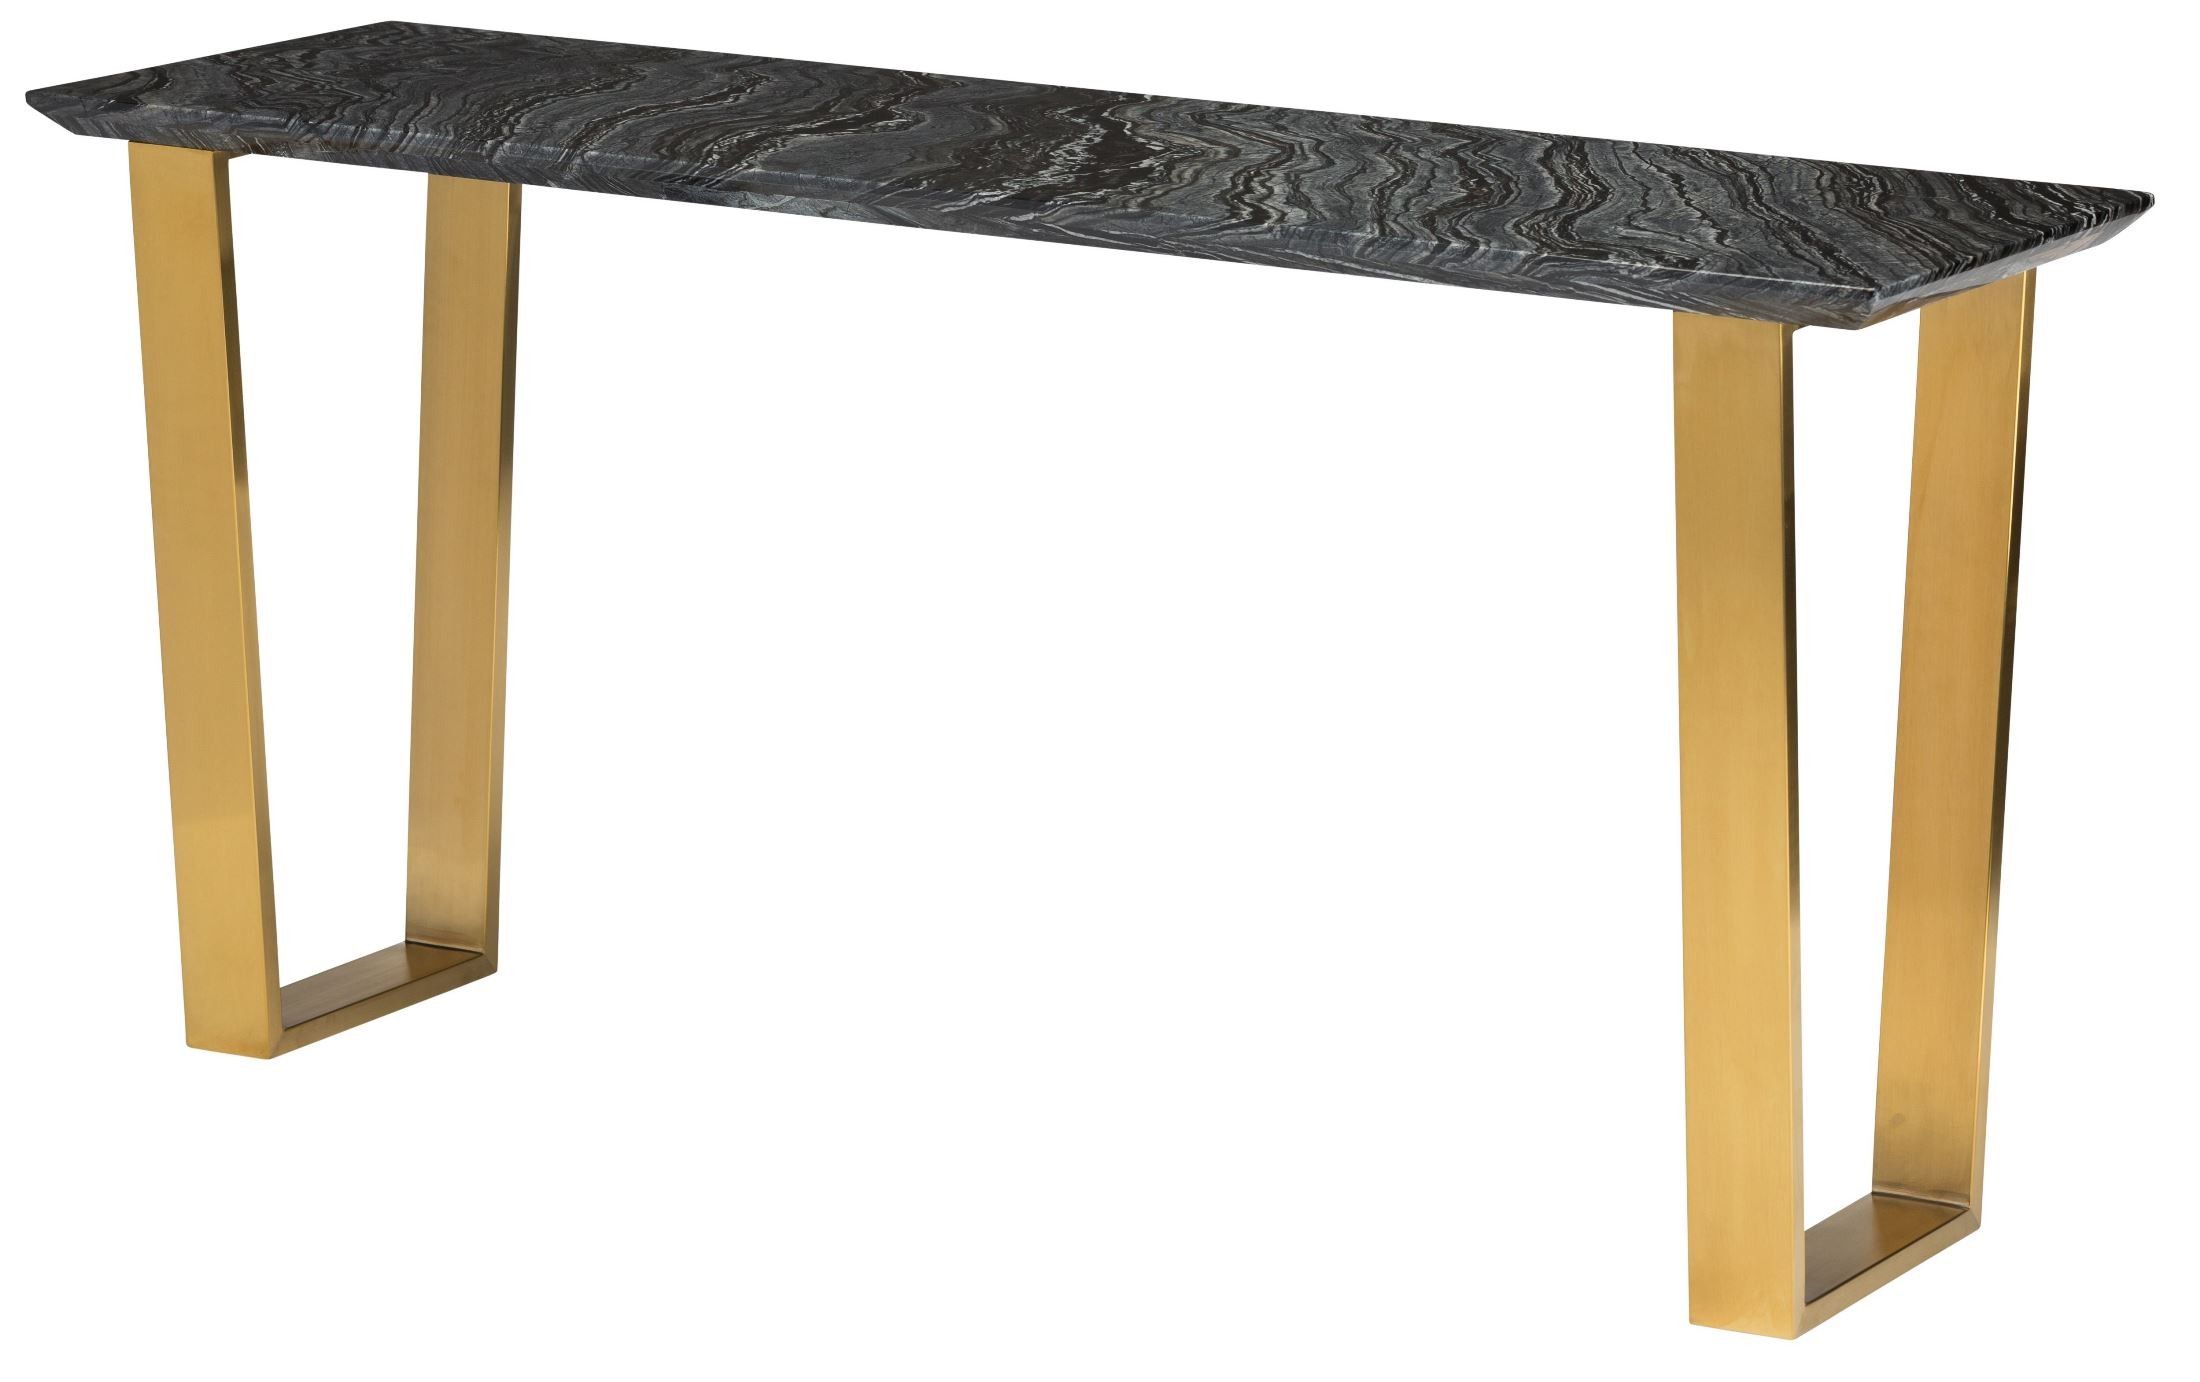 Catrine Black & Gold Stone Console Table, Hgna307, Nuevo Intended For Black And Gold Console Tables (View 14 of 20)